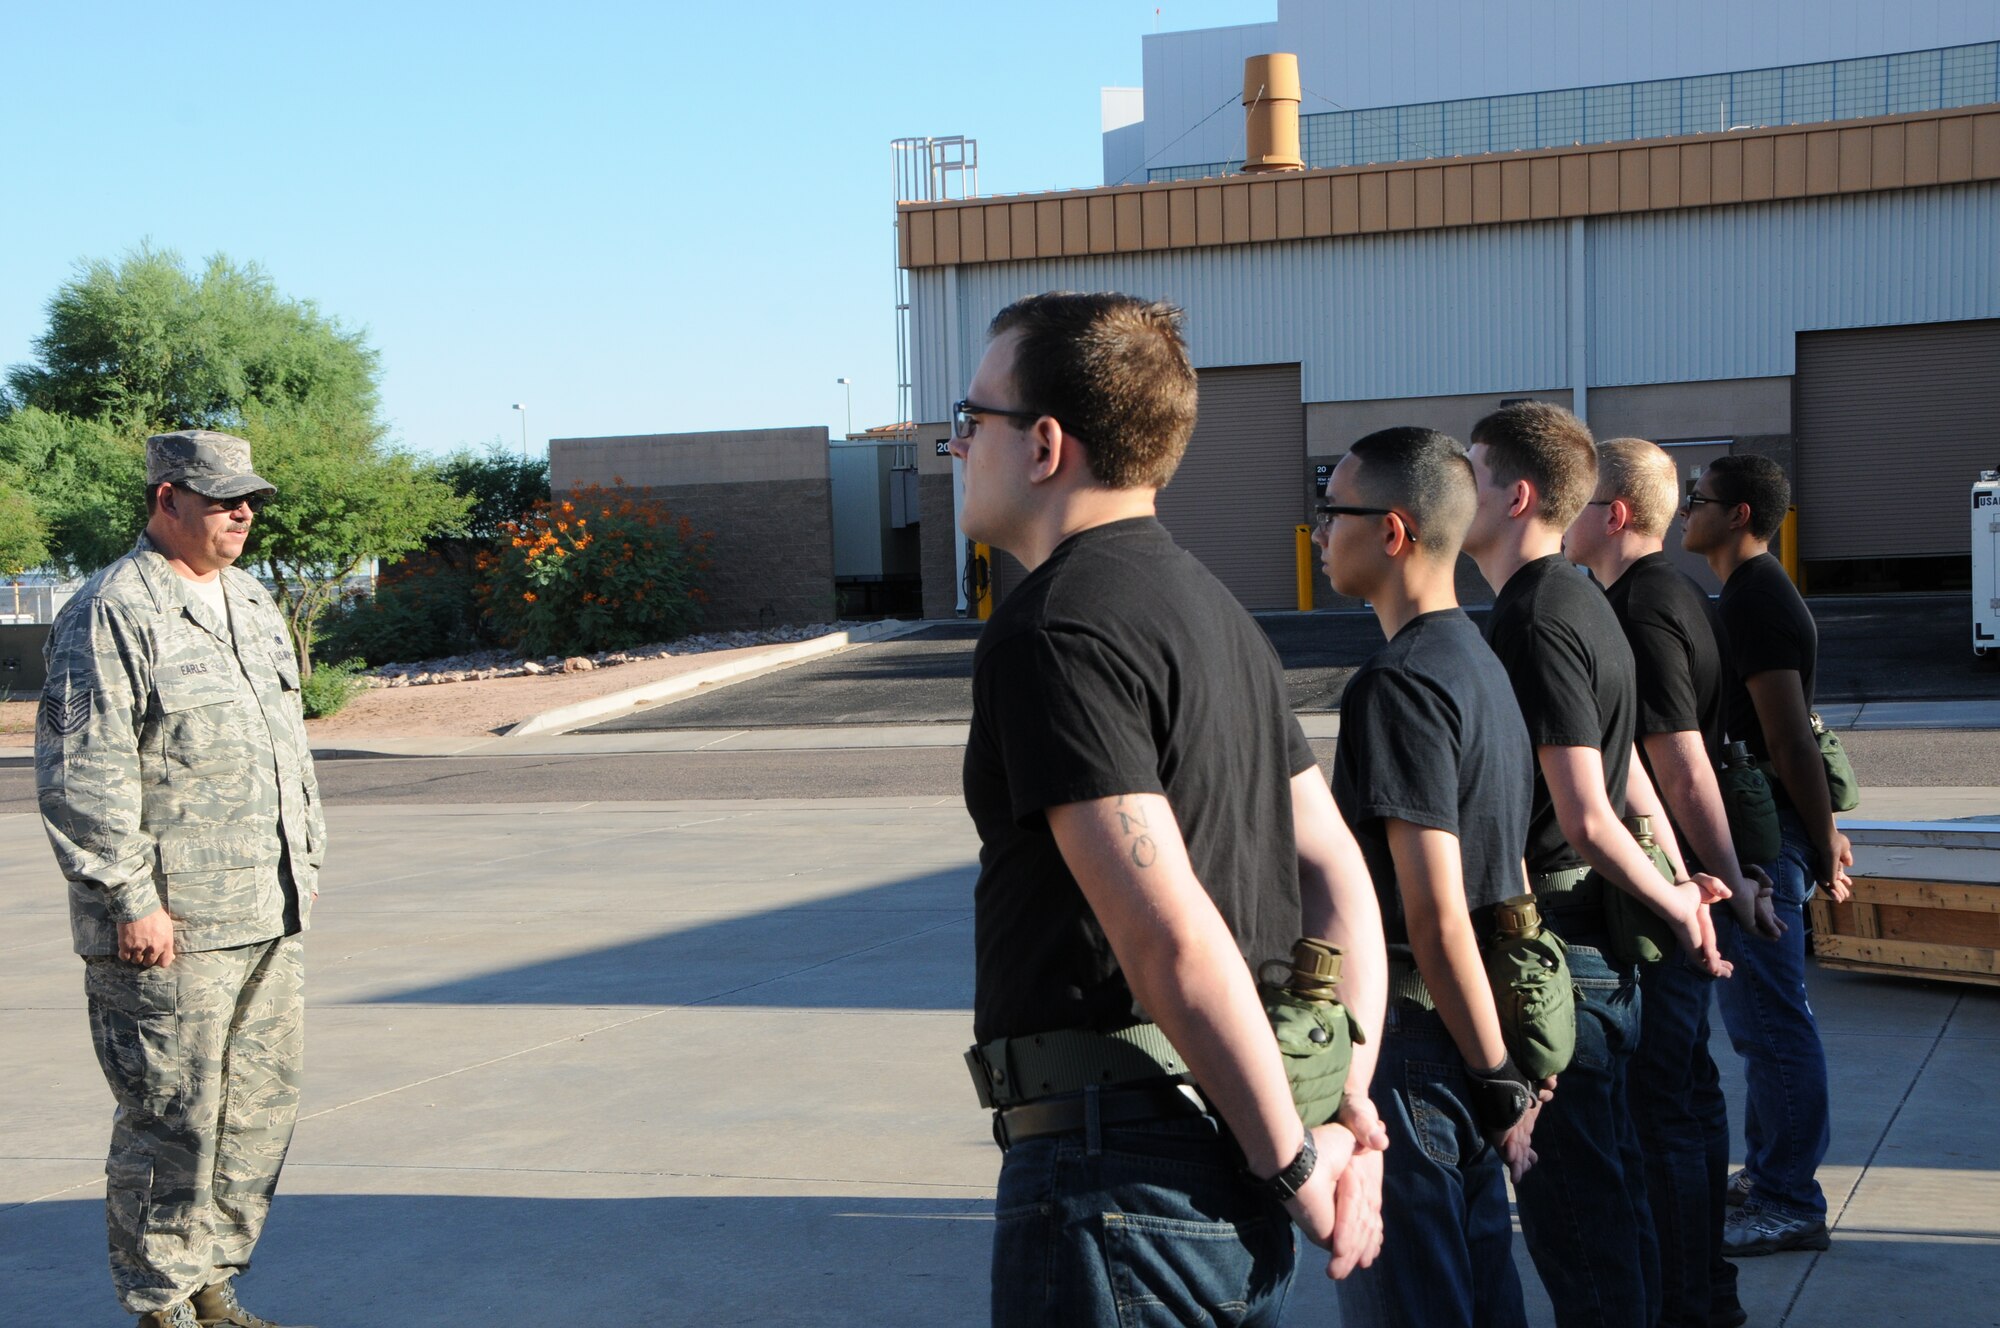 Tech. Sgt. Bret Earls, 161st Air Refueling Wing student flight instructor and former U.S. Army drill instructor, inspects a formation of trainees at the Phoenix Air National Guard Base, Aug. 2. The main purpose of the student flight is to in-process new recruits into the wing and then out-process them to basic training and technical school; however, a secondary benefit is the mentorship the trainees receive from the student flight’s instructors. (U.S. Air National Guard photo by Tech. Sgt. Michael Matkin)